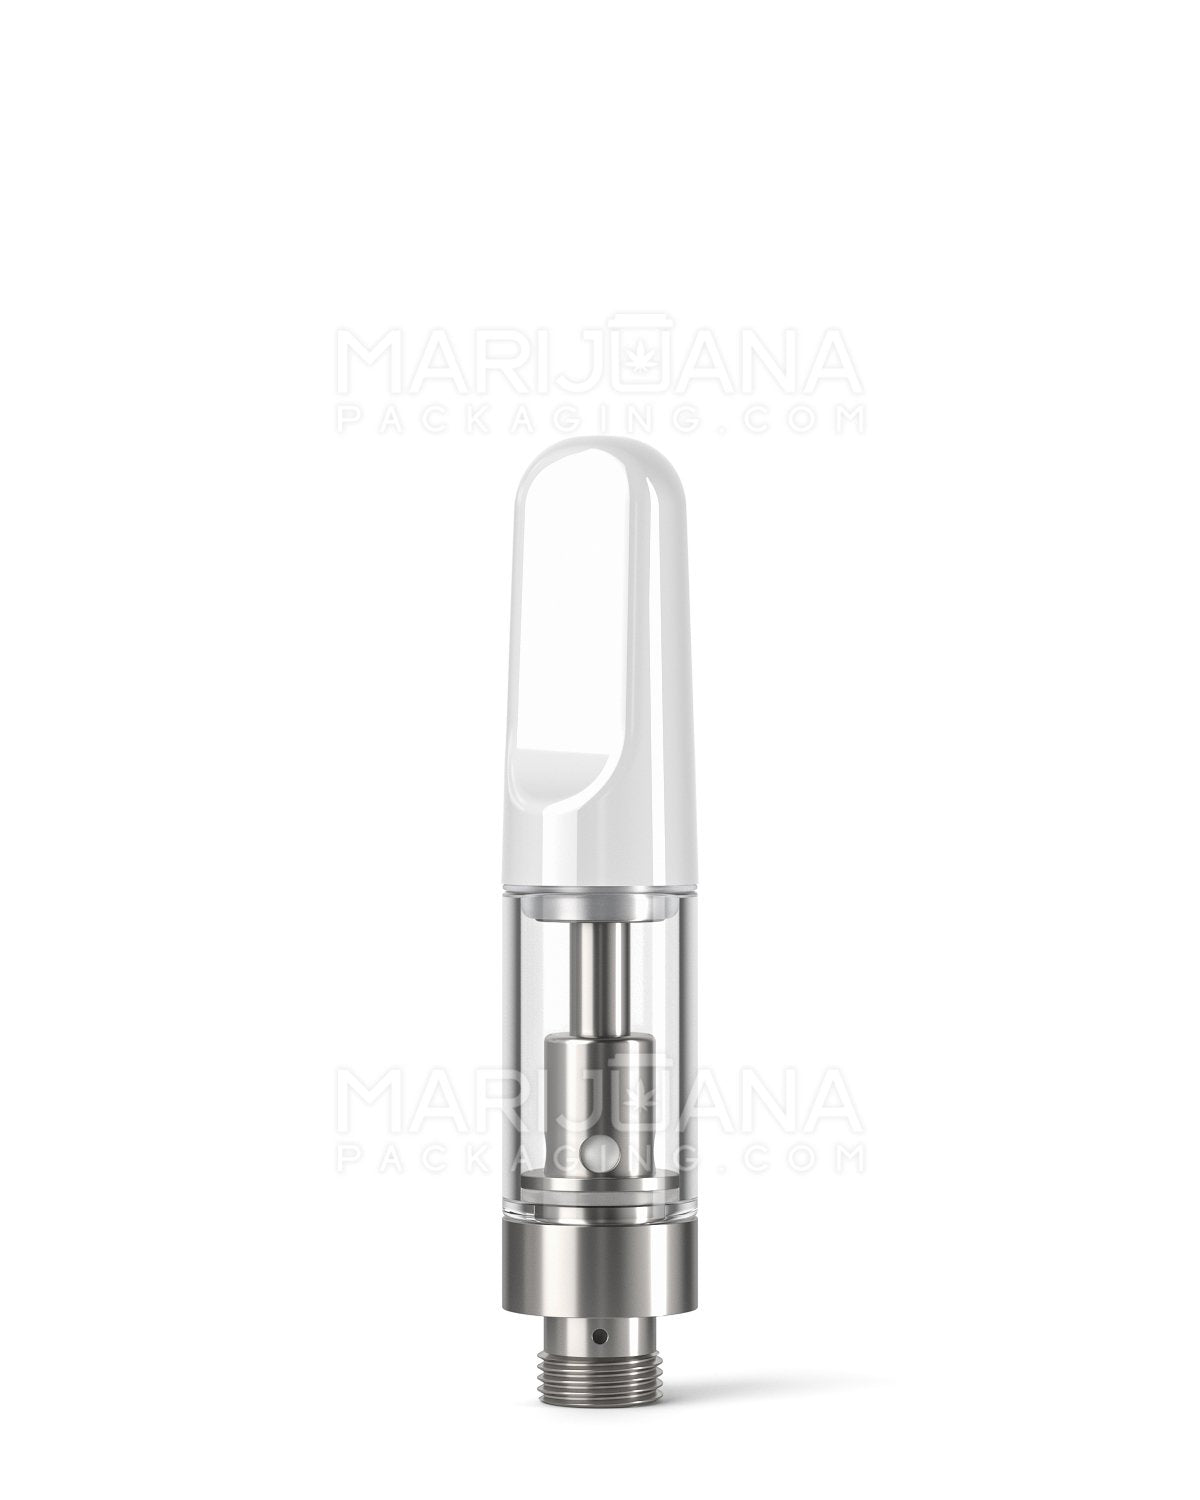 CCELL | Liquid6 Reactor Glass Cartridge with White Ceramic Mouthpiece | 0.5mL - Screw On | Sample - 1